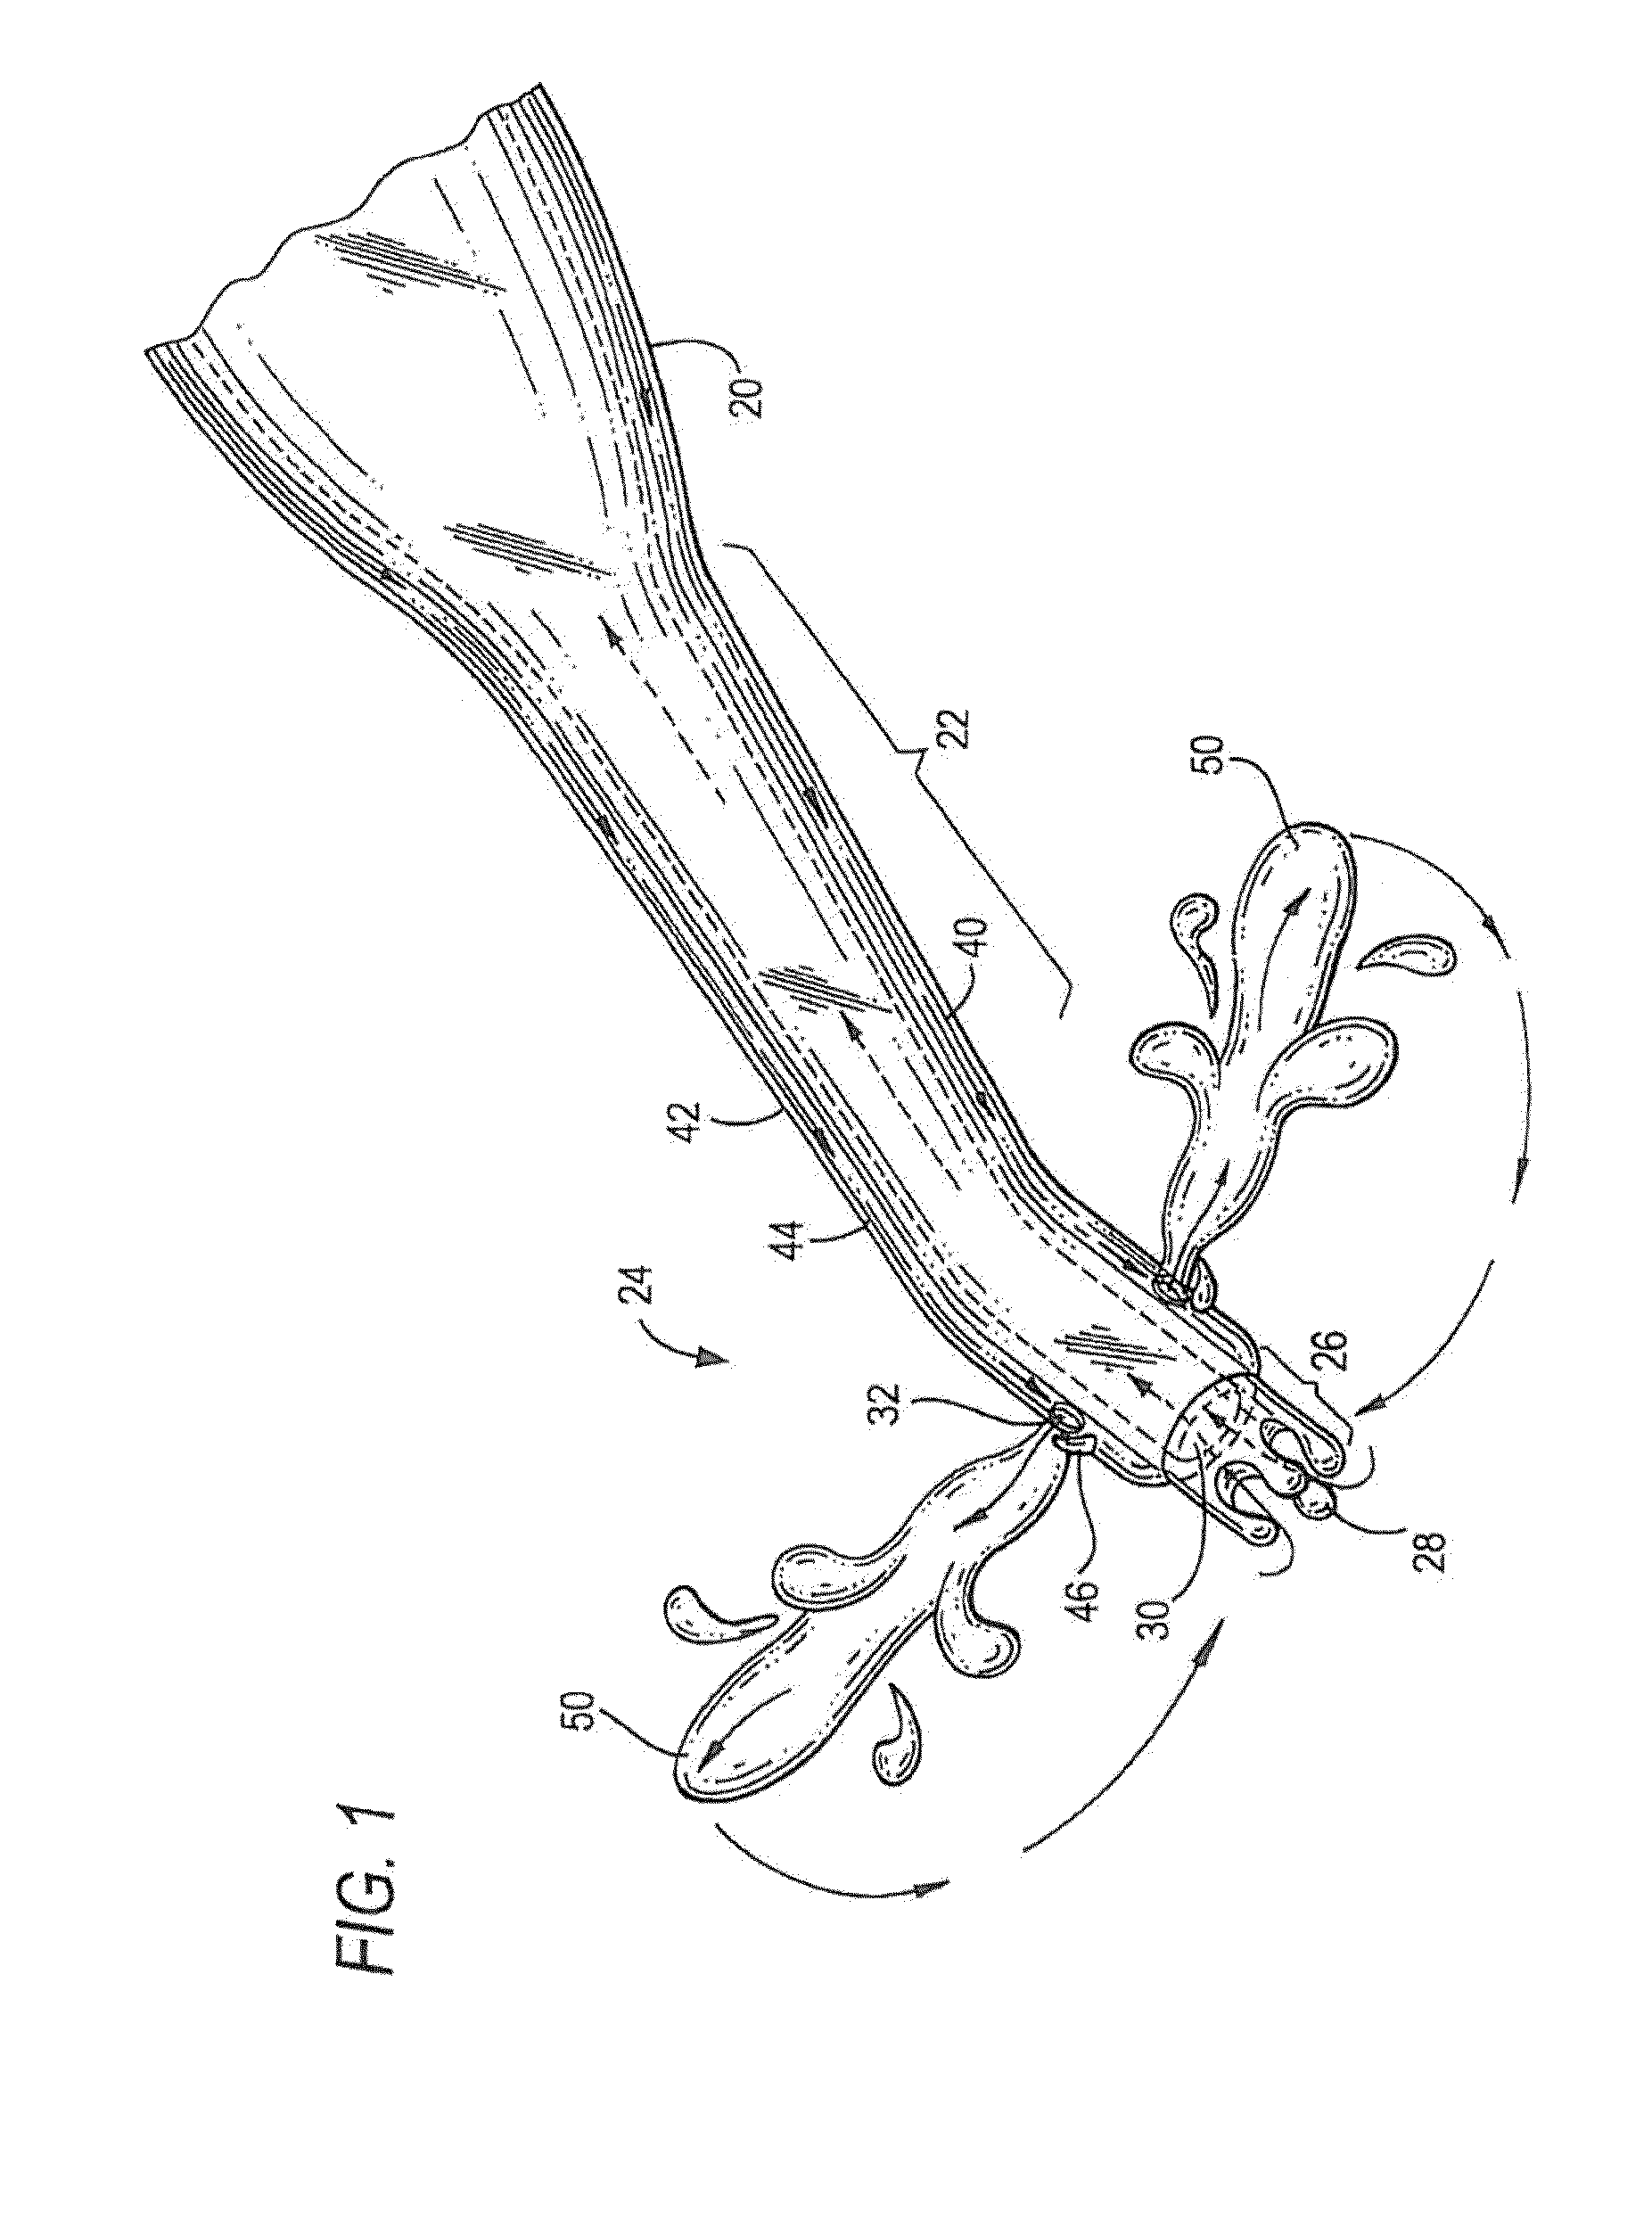 Apparatus and method for performing phacoemulsification